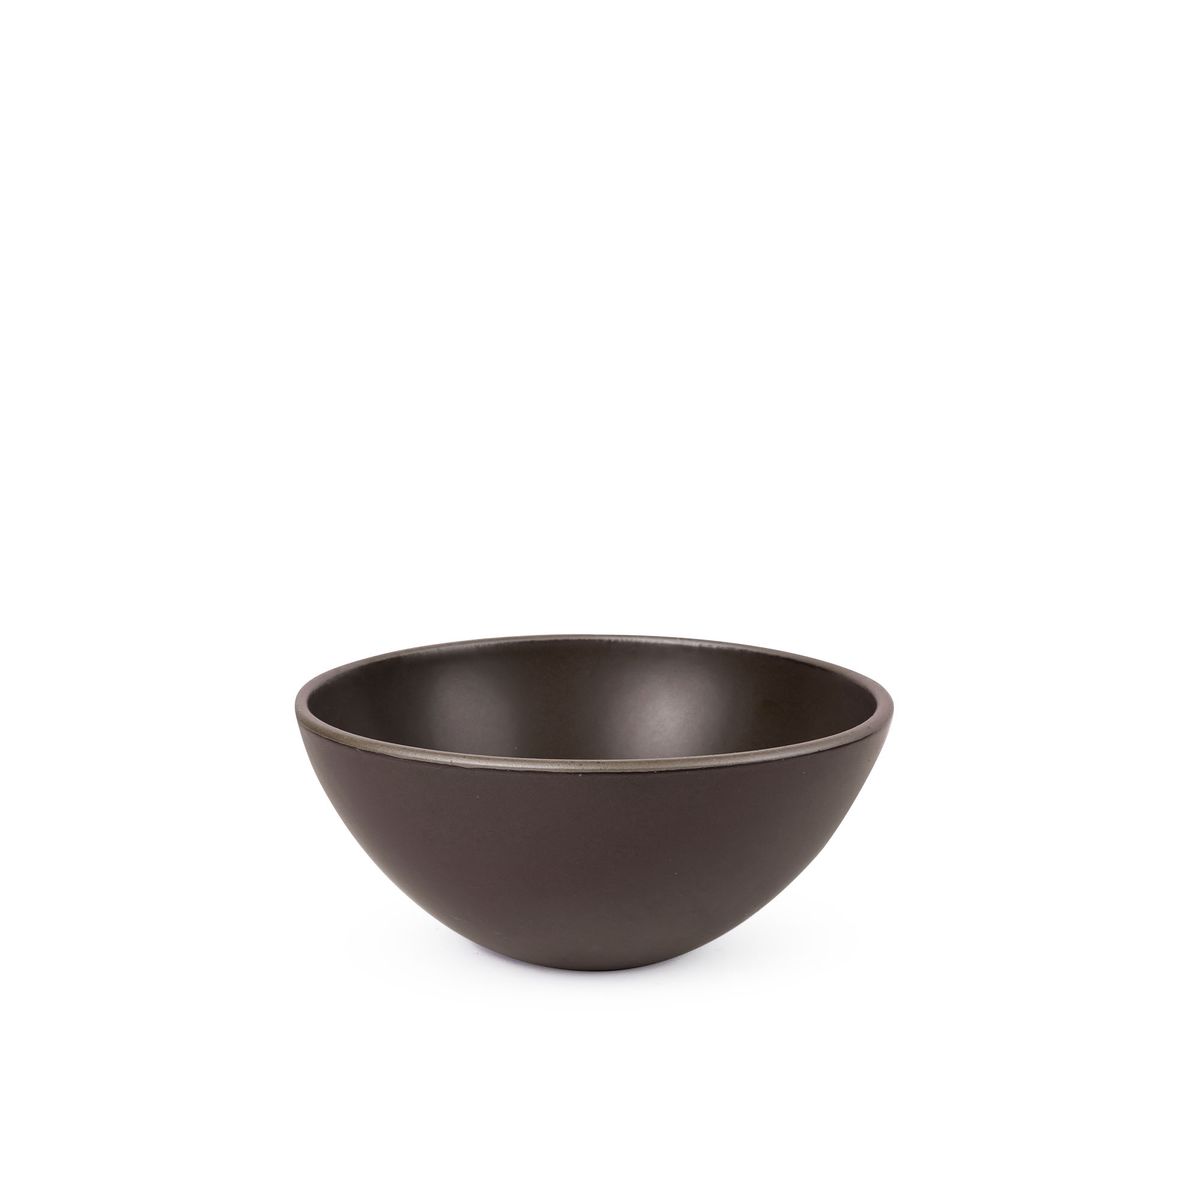 A medium rounded ceramic bowl in a dark cool brown color featuring iron speckles and an unglazed rim